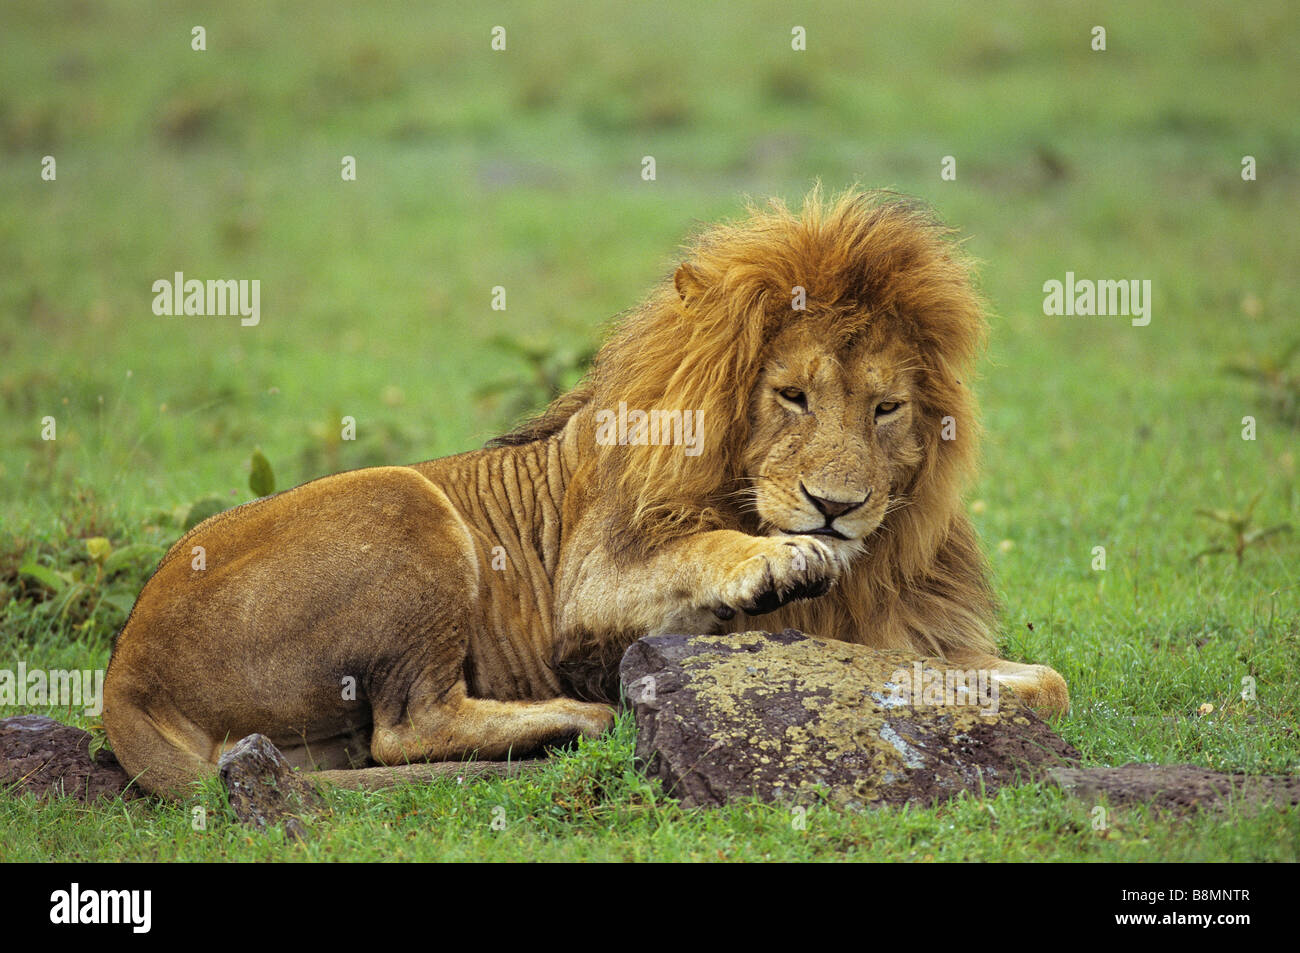 Lion Swatting a Fly Stock Photo